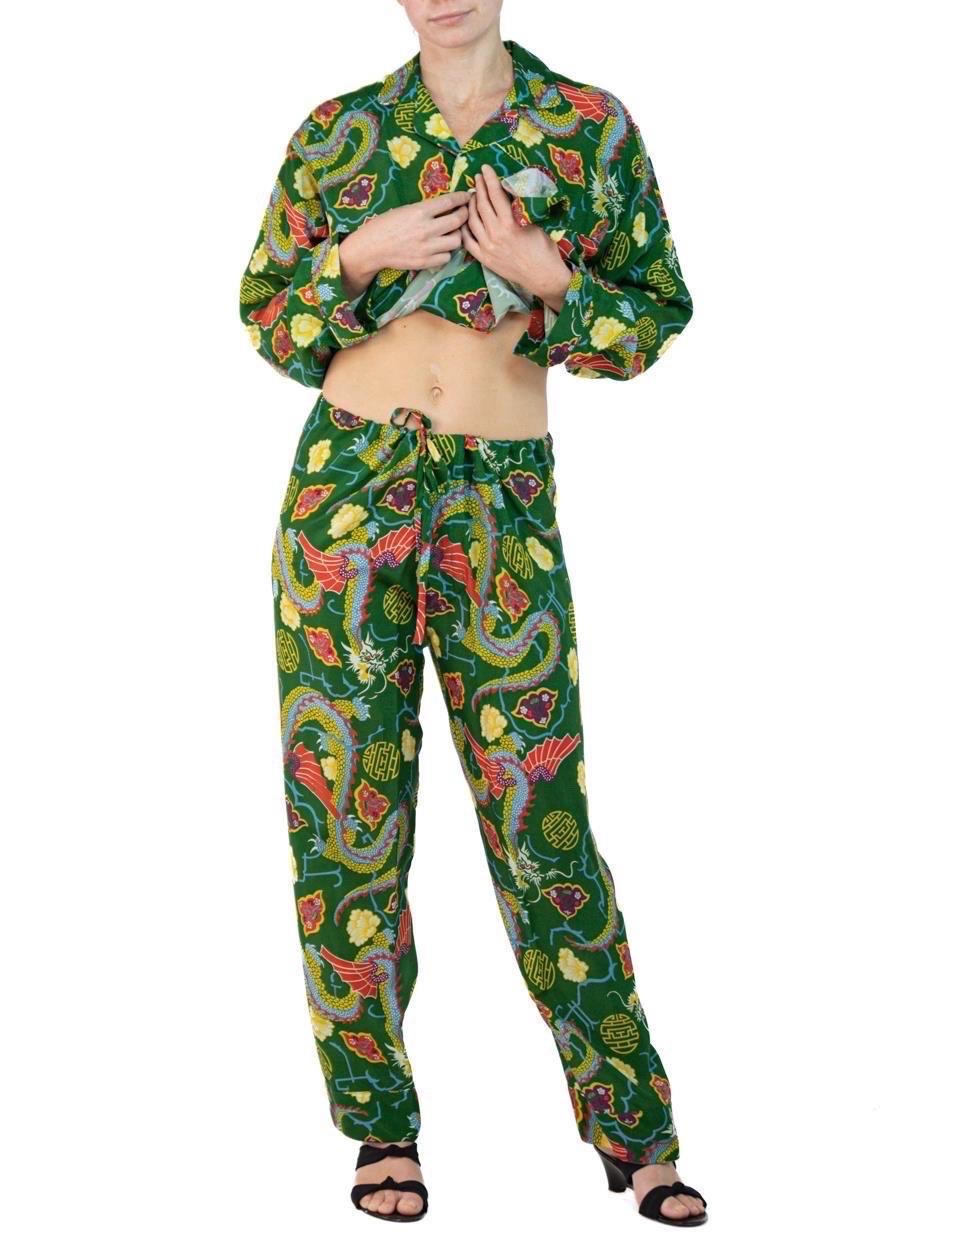 Women's or Men's Morphew Collection Green & Yellow Dragon Novelty Print Cold Rayon Bias Draw Str For Sale